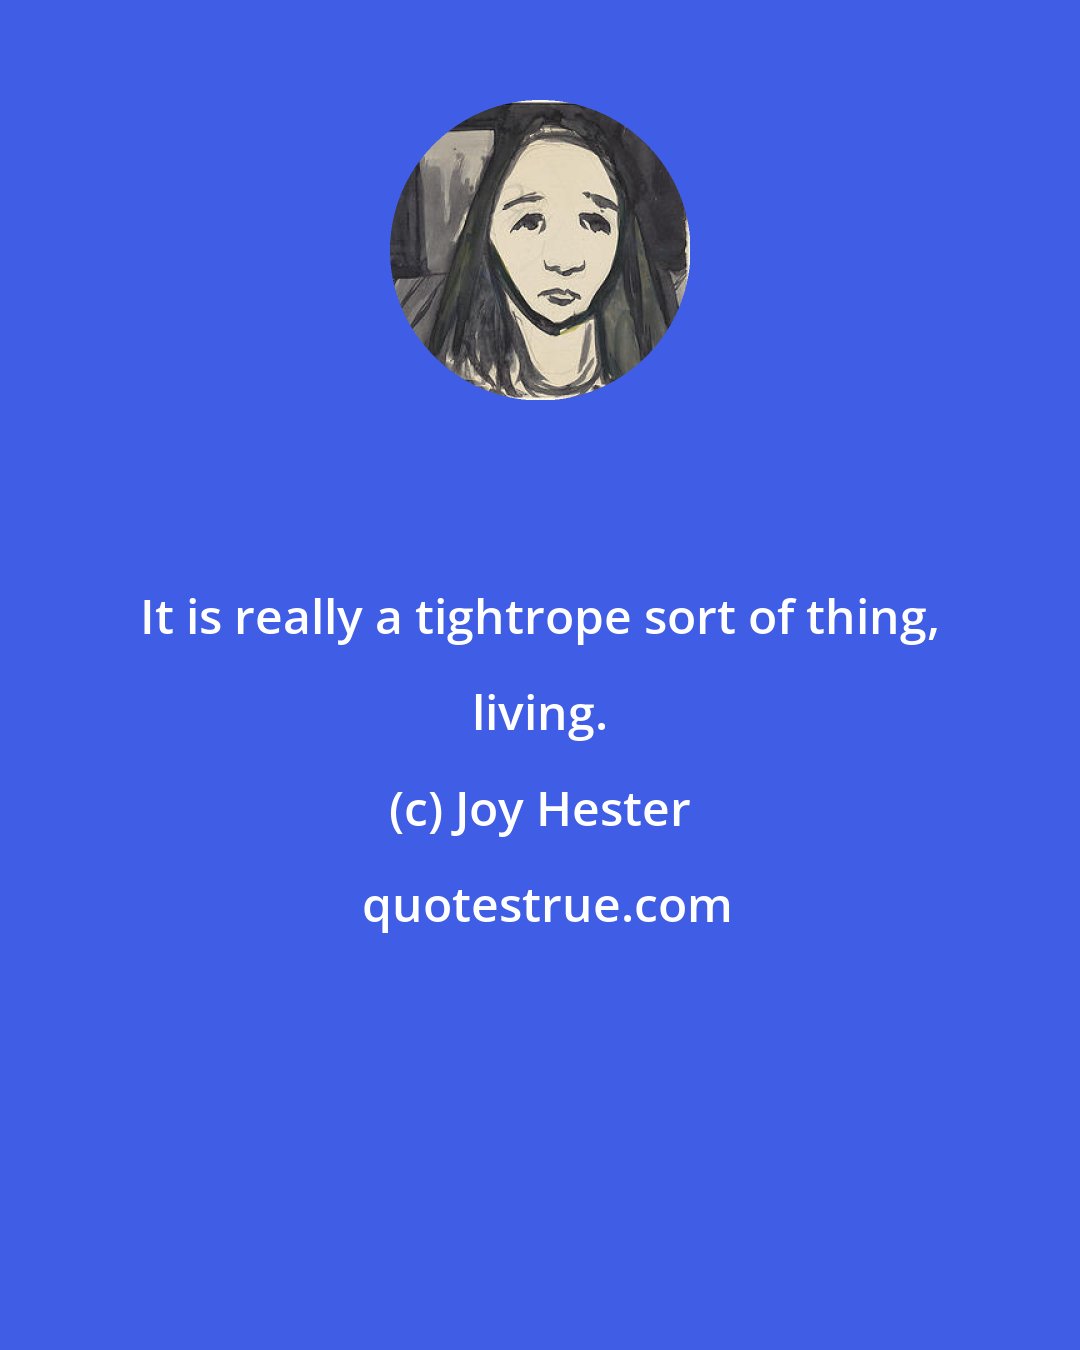 Joy Hester: It is really a tightrope sort of thing, living.